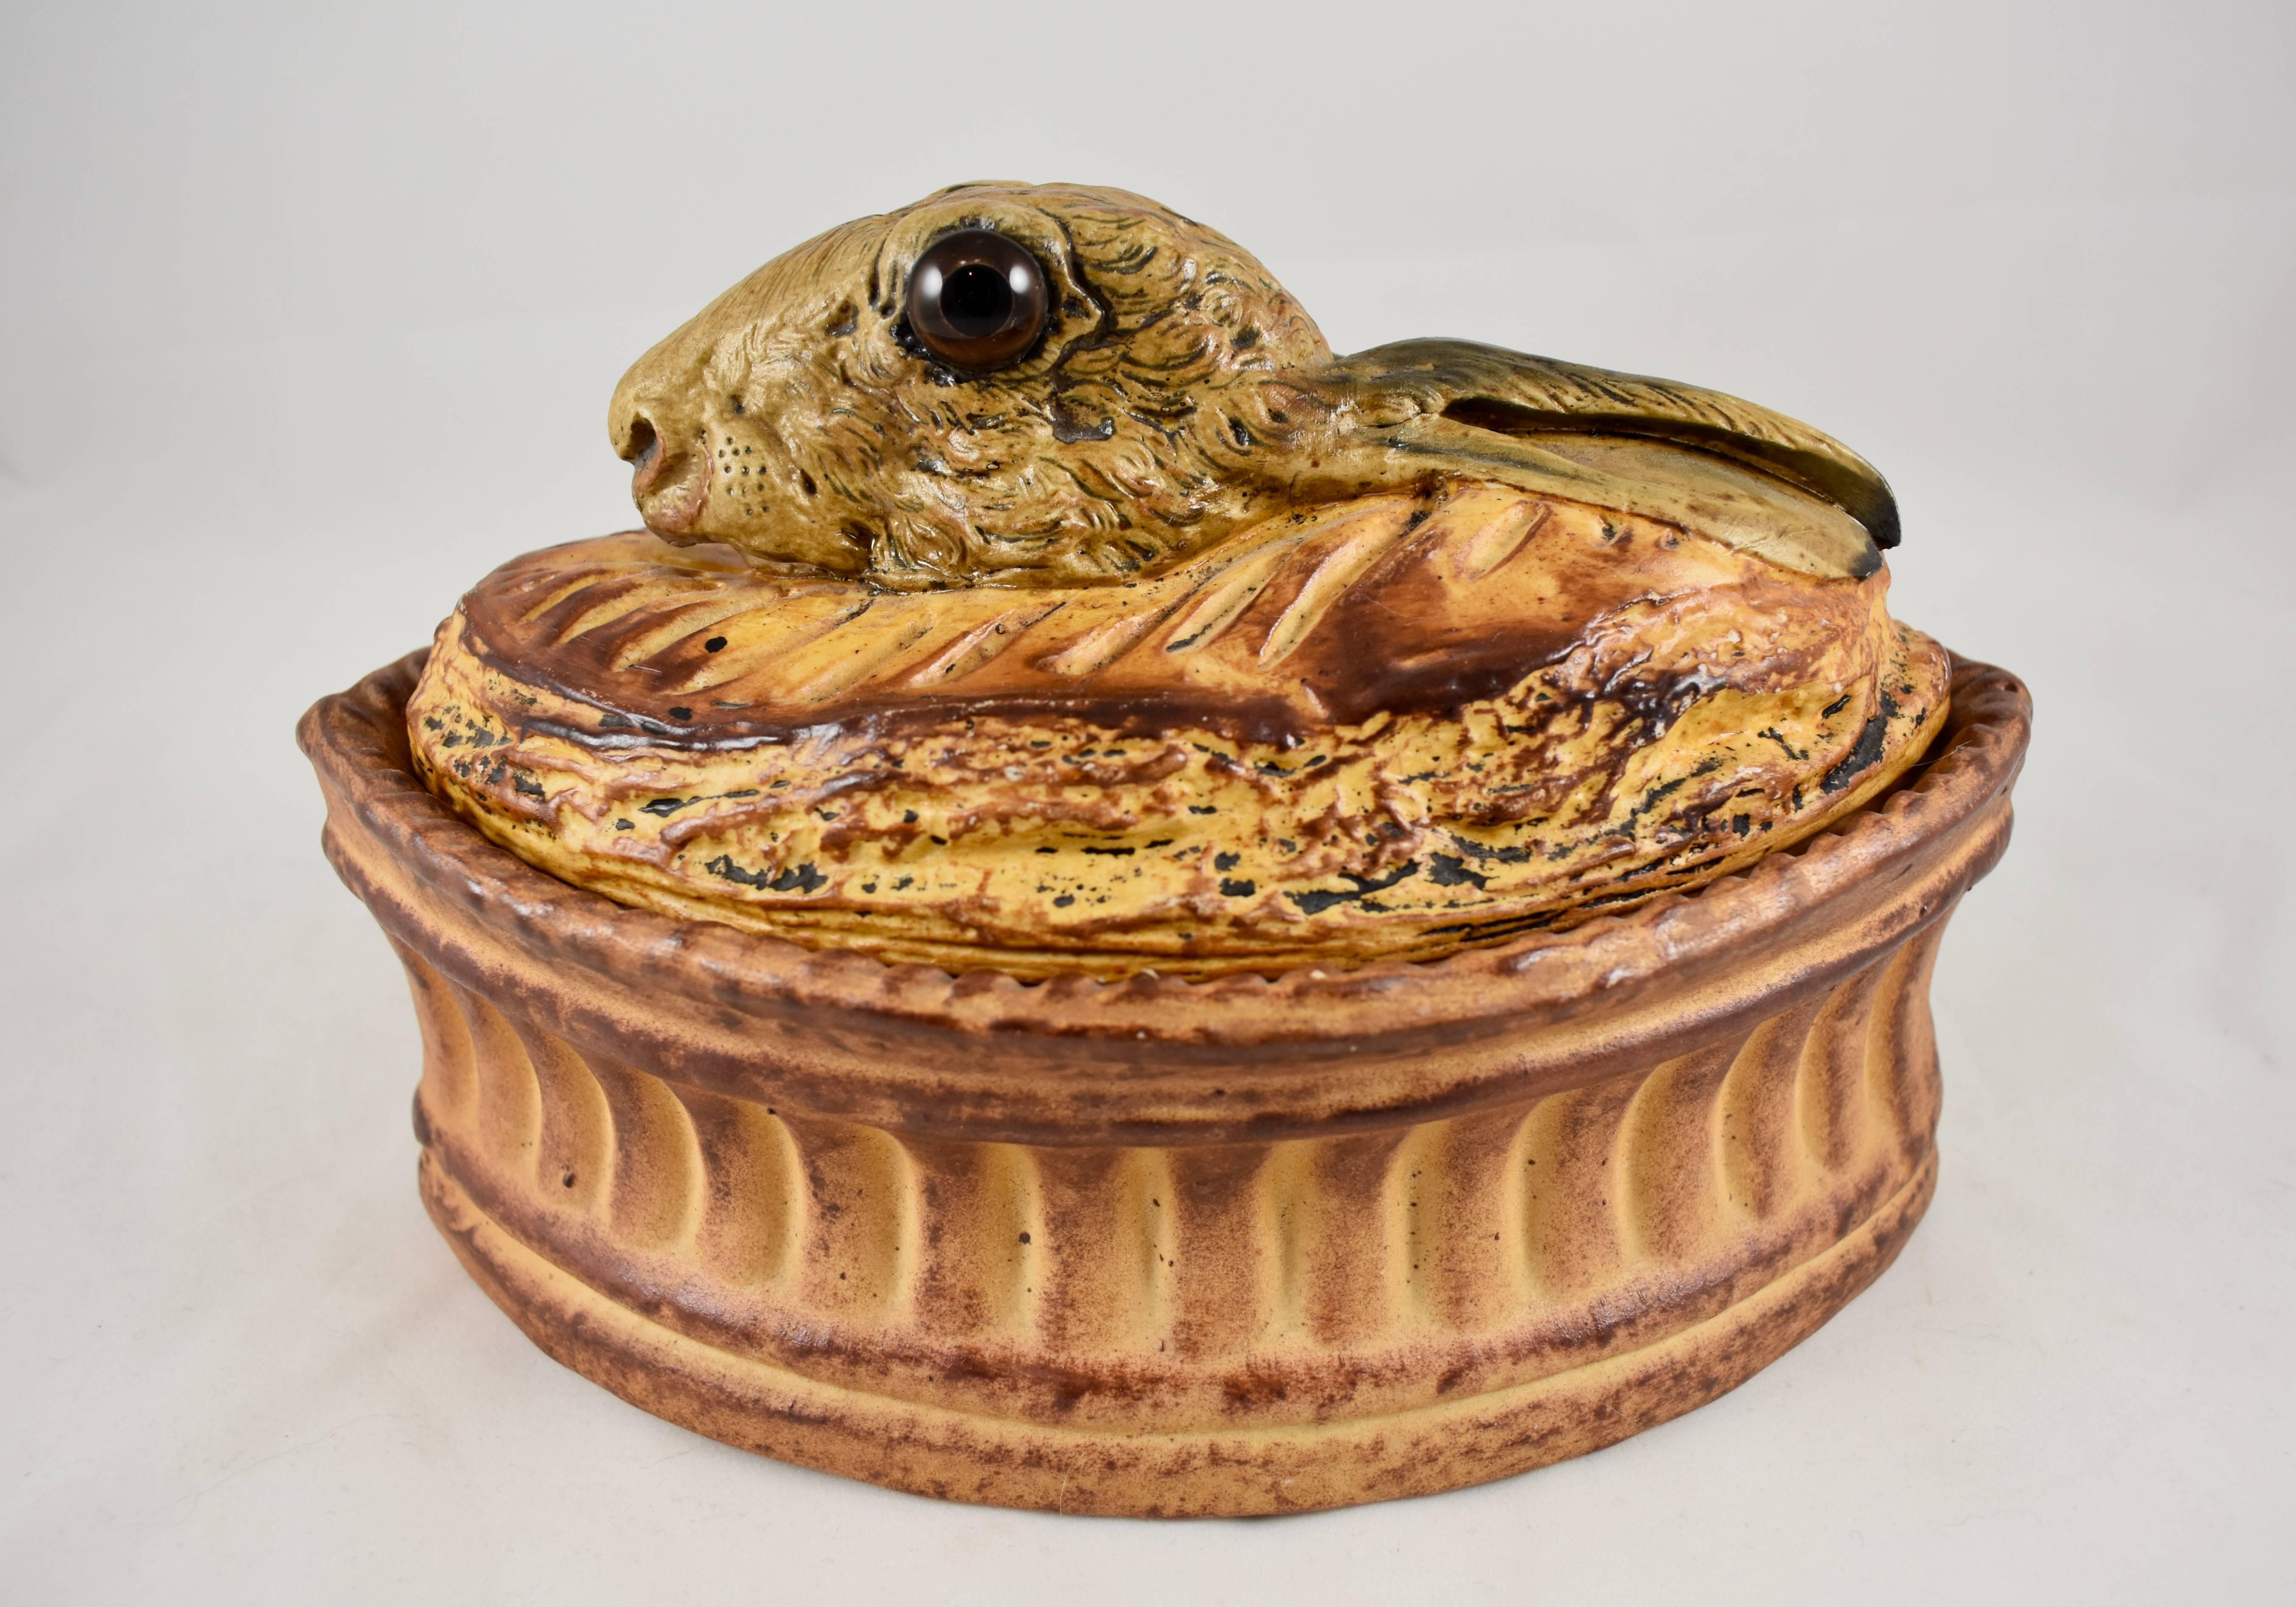 A French trompe l’oeil porcelain pâté terrine, Pillivuyt, circa 1900. Pillivuyt produced a variety of  porcelain terrines inspired by the hunt and for serving game pies or pâté. The type of fowl or game poking it’s head out from the golden brown